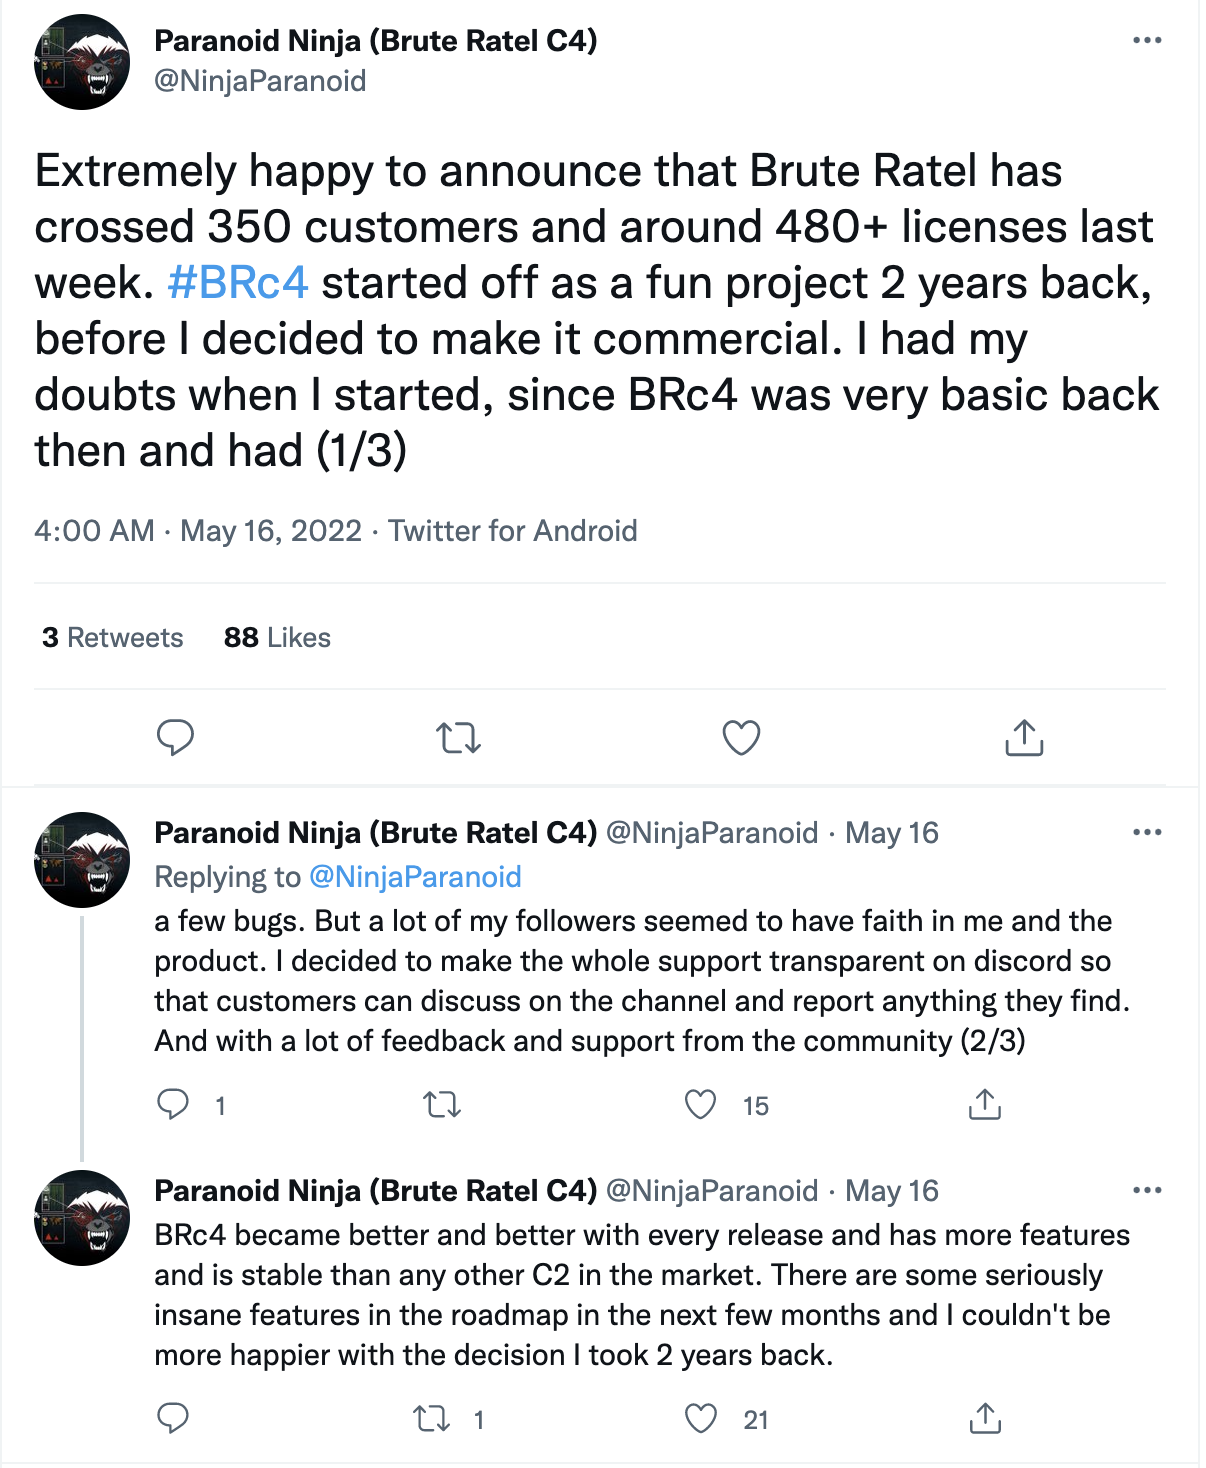 Twitter post by Paranoid Ninja (Brute Ratel C4): Extremely happy to announce that Brute Ratel has crossed 350 customers and around 480+ licenses last week. #BRc4 started off as a fun project 2 years back, before I decided to make it commercial. I had my doubts when I started, since BRc4 was very basic back then and had a few bugs. But a lot of my followers seemed to have faith in me and the product. I decided to make the whole support transparent on discord so that customers can discuss on the channel and report anything they find. And with a lot of feedback and support from the community, BRc4 became better and better with every release and has more features and is stable than any other C2 in the market. There are some seriously insane features in the roadmap in the next few months and I couldn't be happier with the decision I took 2 years back. 